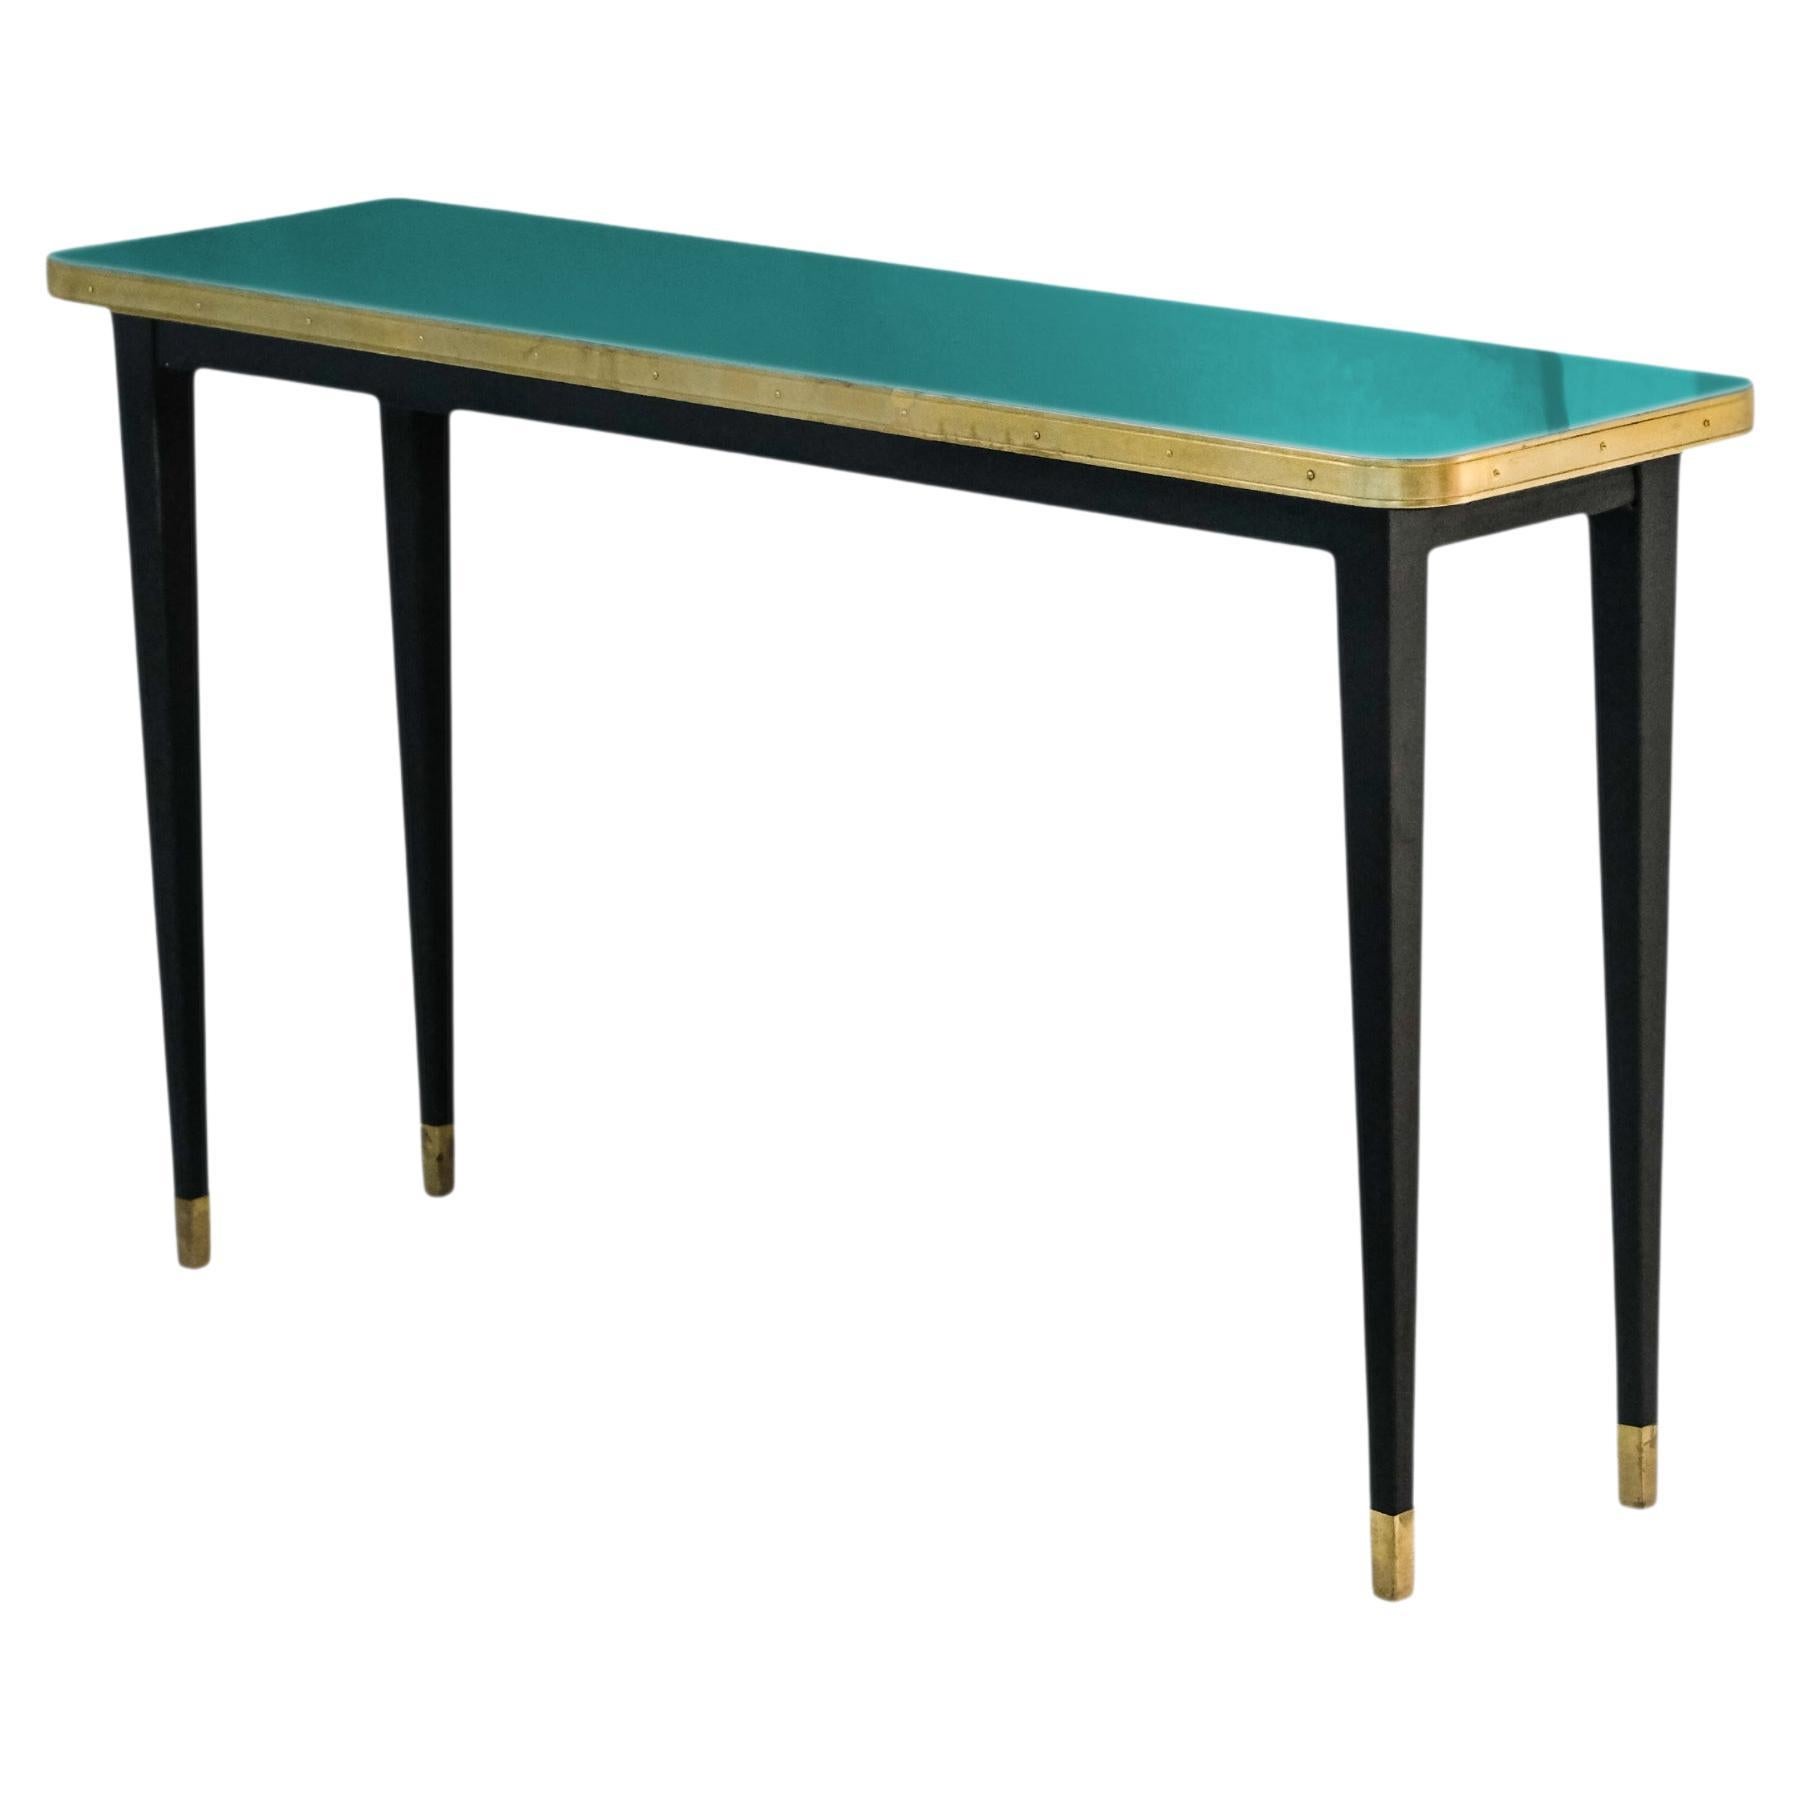 Console Table, High Gloss Laminate & Brass Details, Maui Green - L For Sale